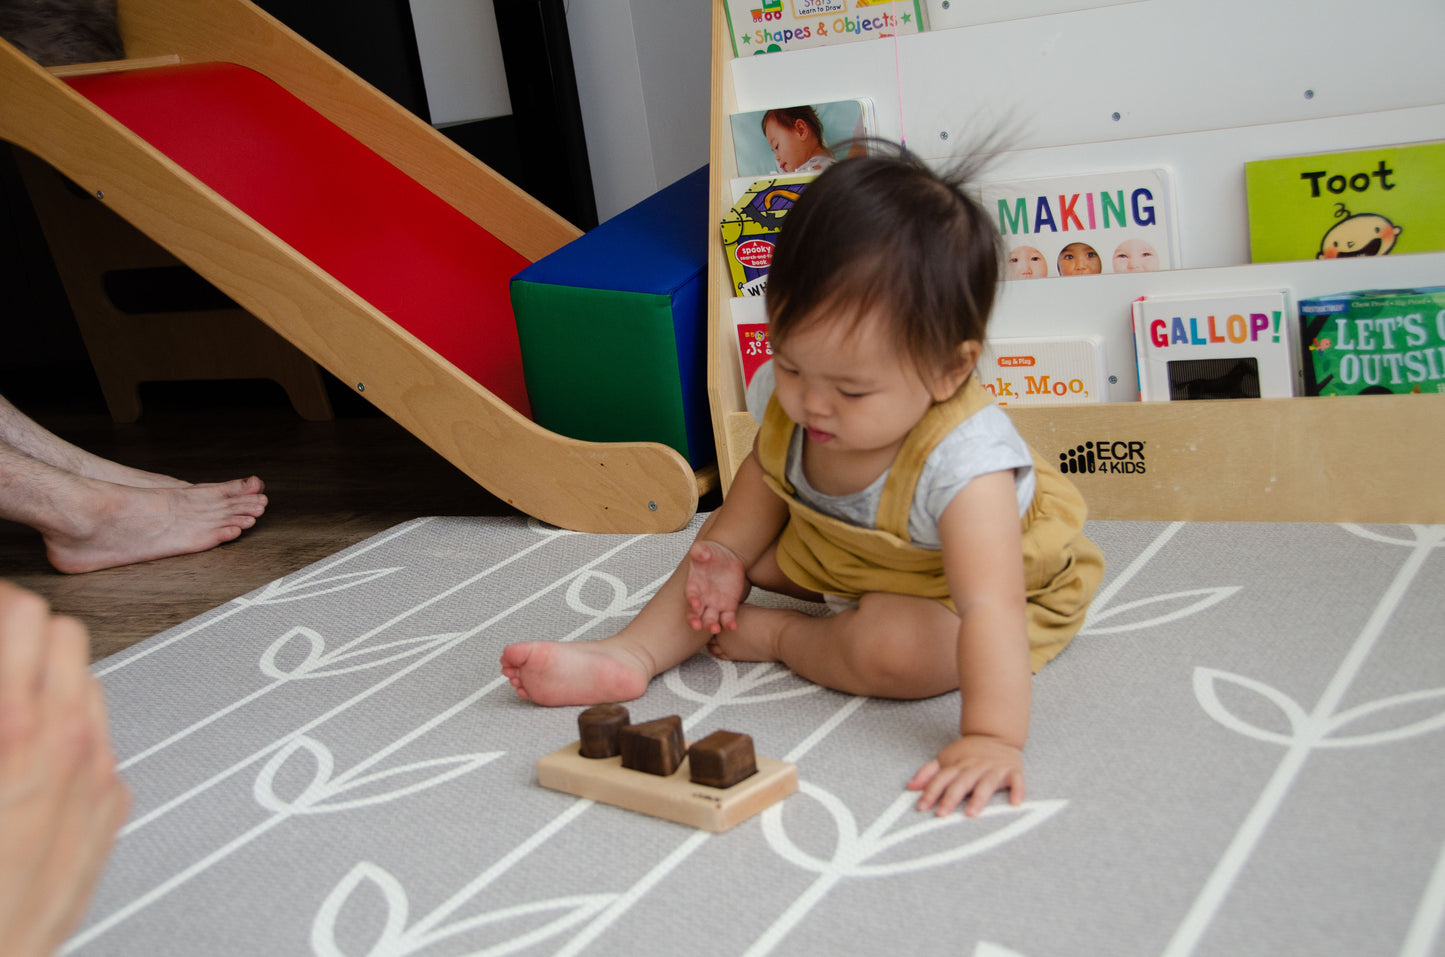 Adorable baby girl happily playing with Cubos Basic, exploring different shape wooden blocks and enjoying the creative possibilities offered by this engaging and educational toy.